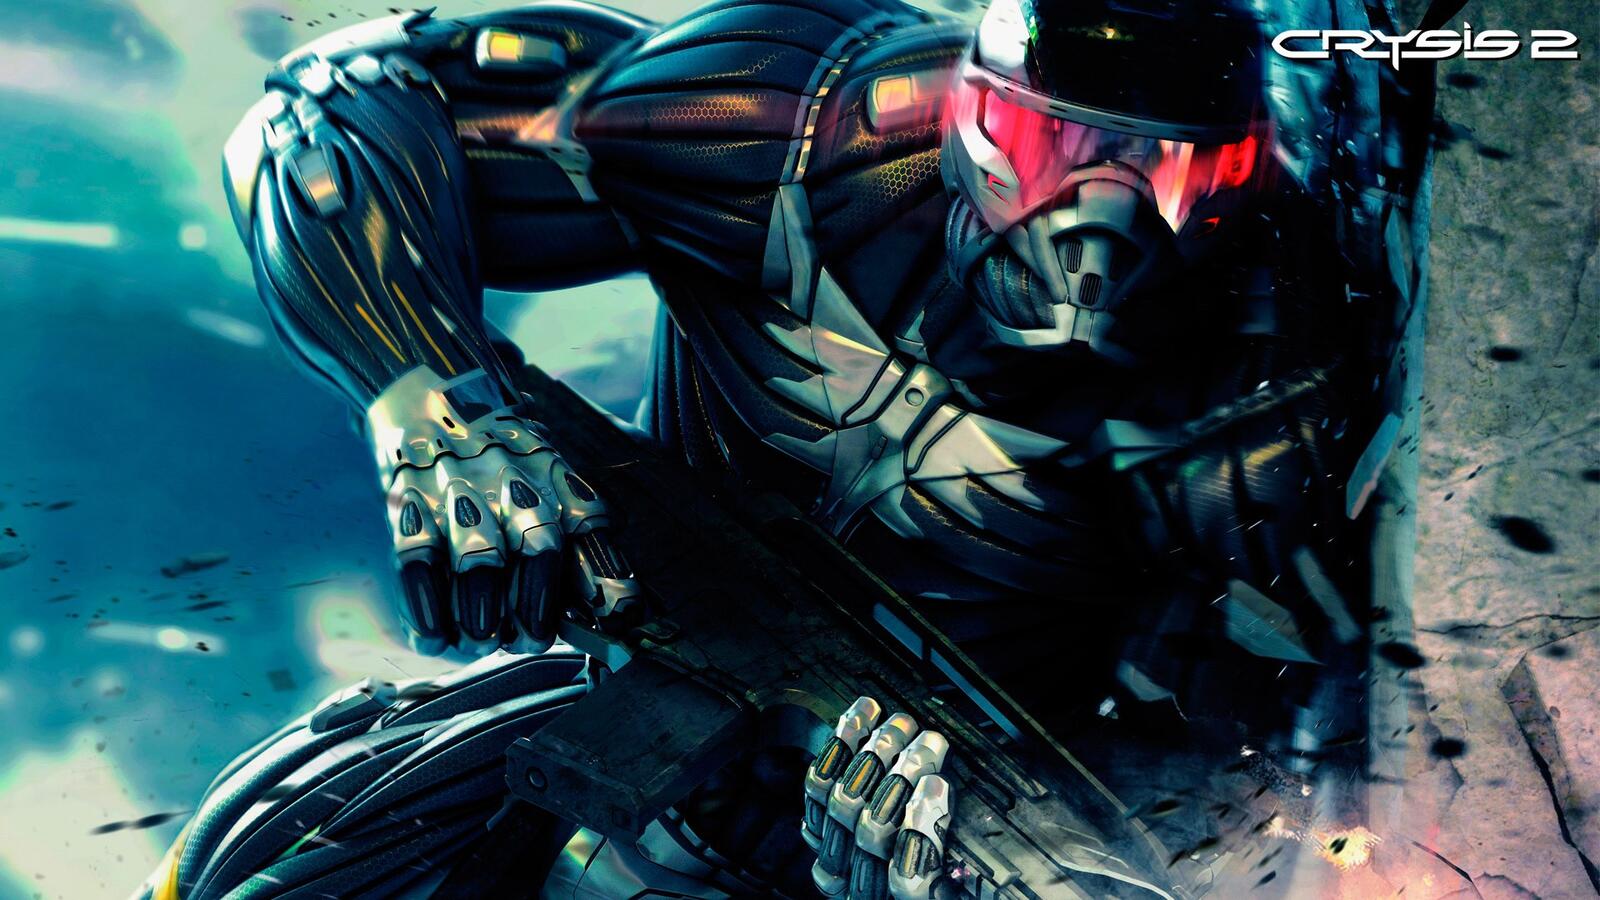 Wallpapers Crysis 2 video games games on the desktop